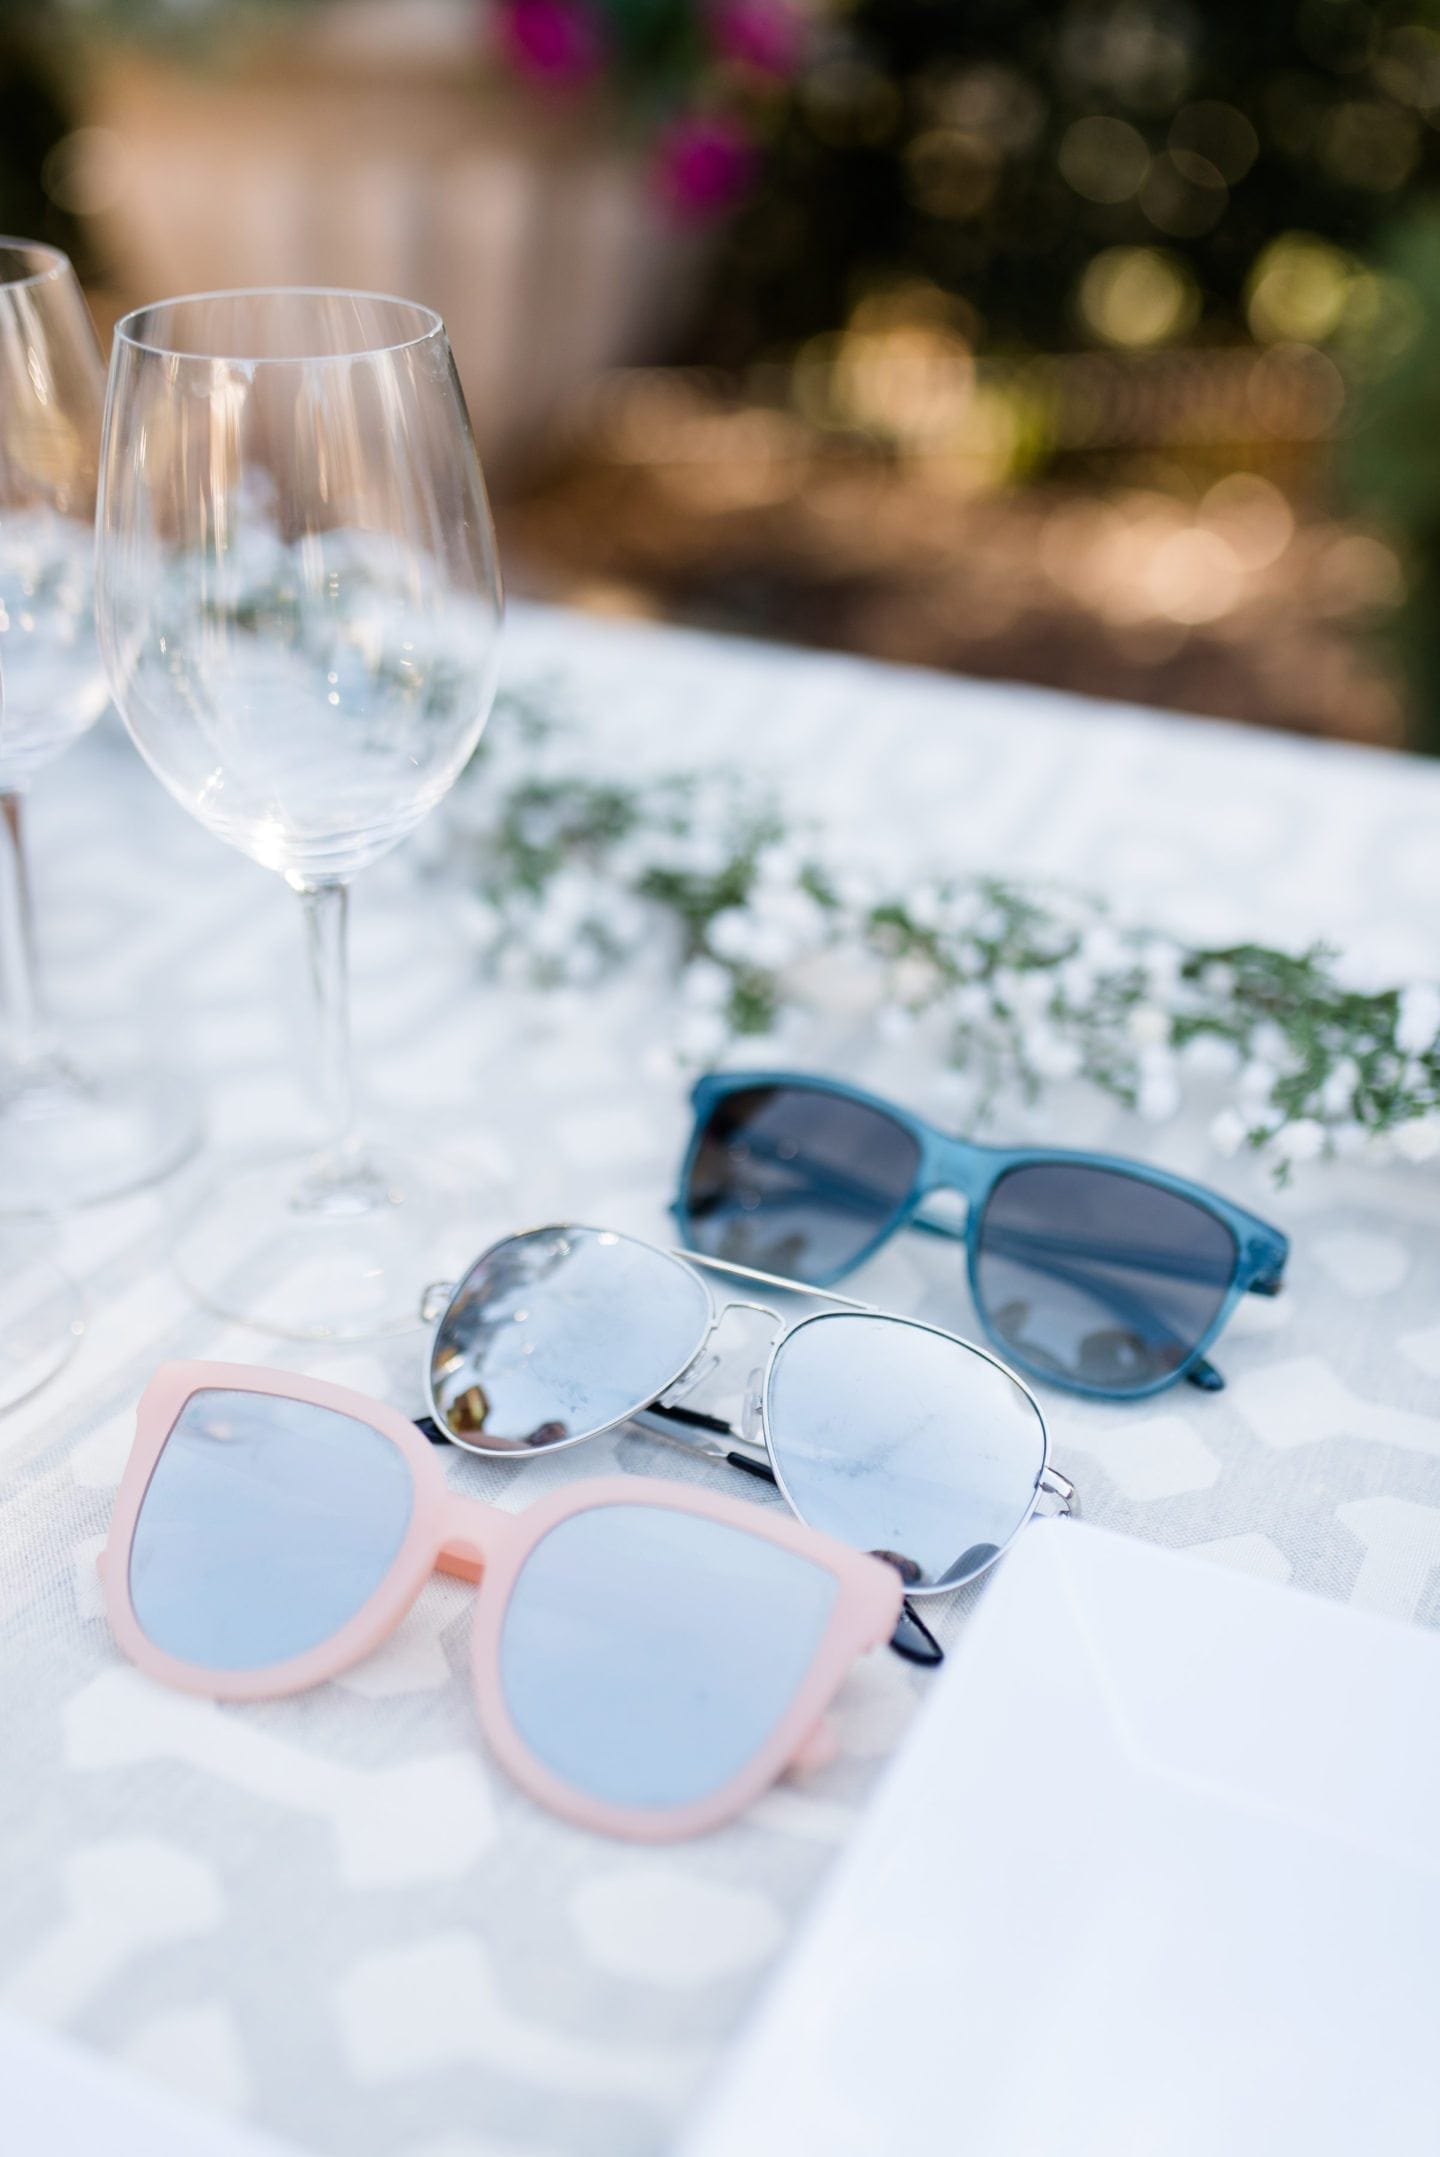 How to host a pool party. Have lots of sunglasses laid out for guests. Make parties easy for friends to come over. Pink Quay sunglasses, Aviators and more!